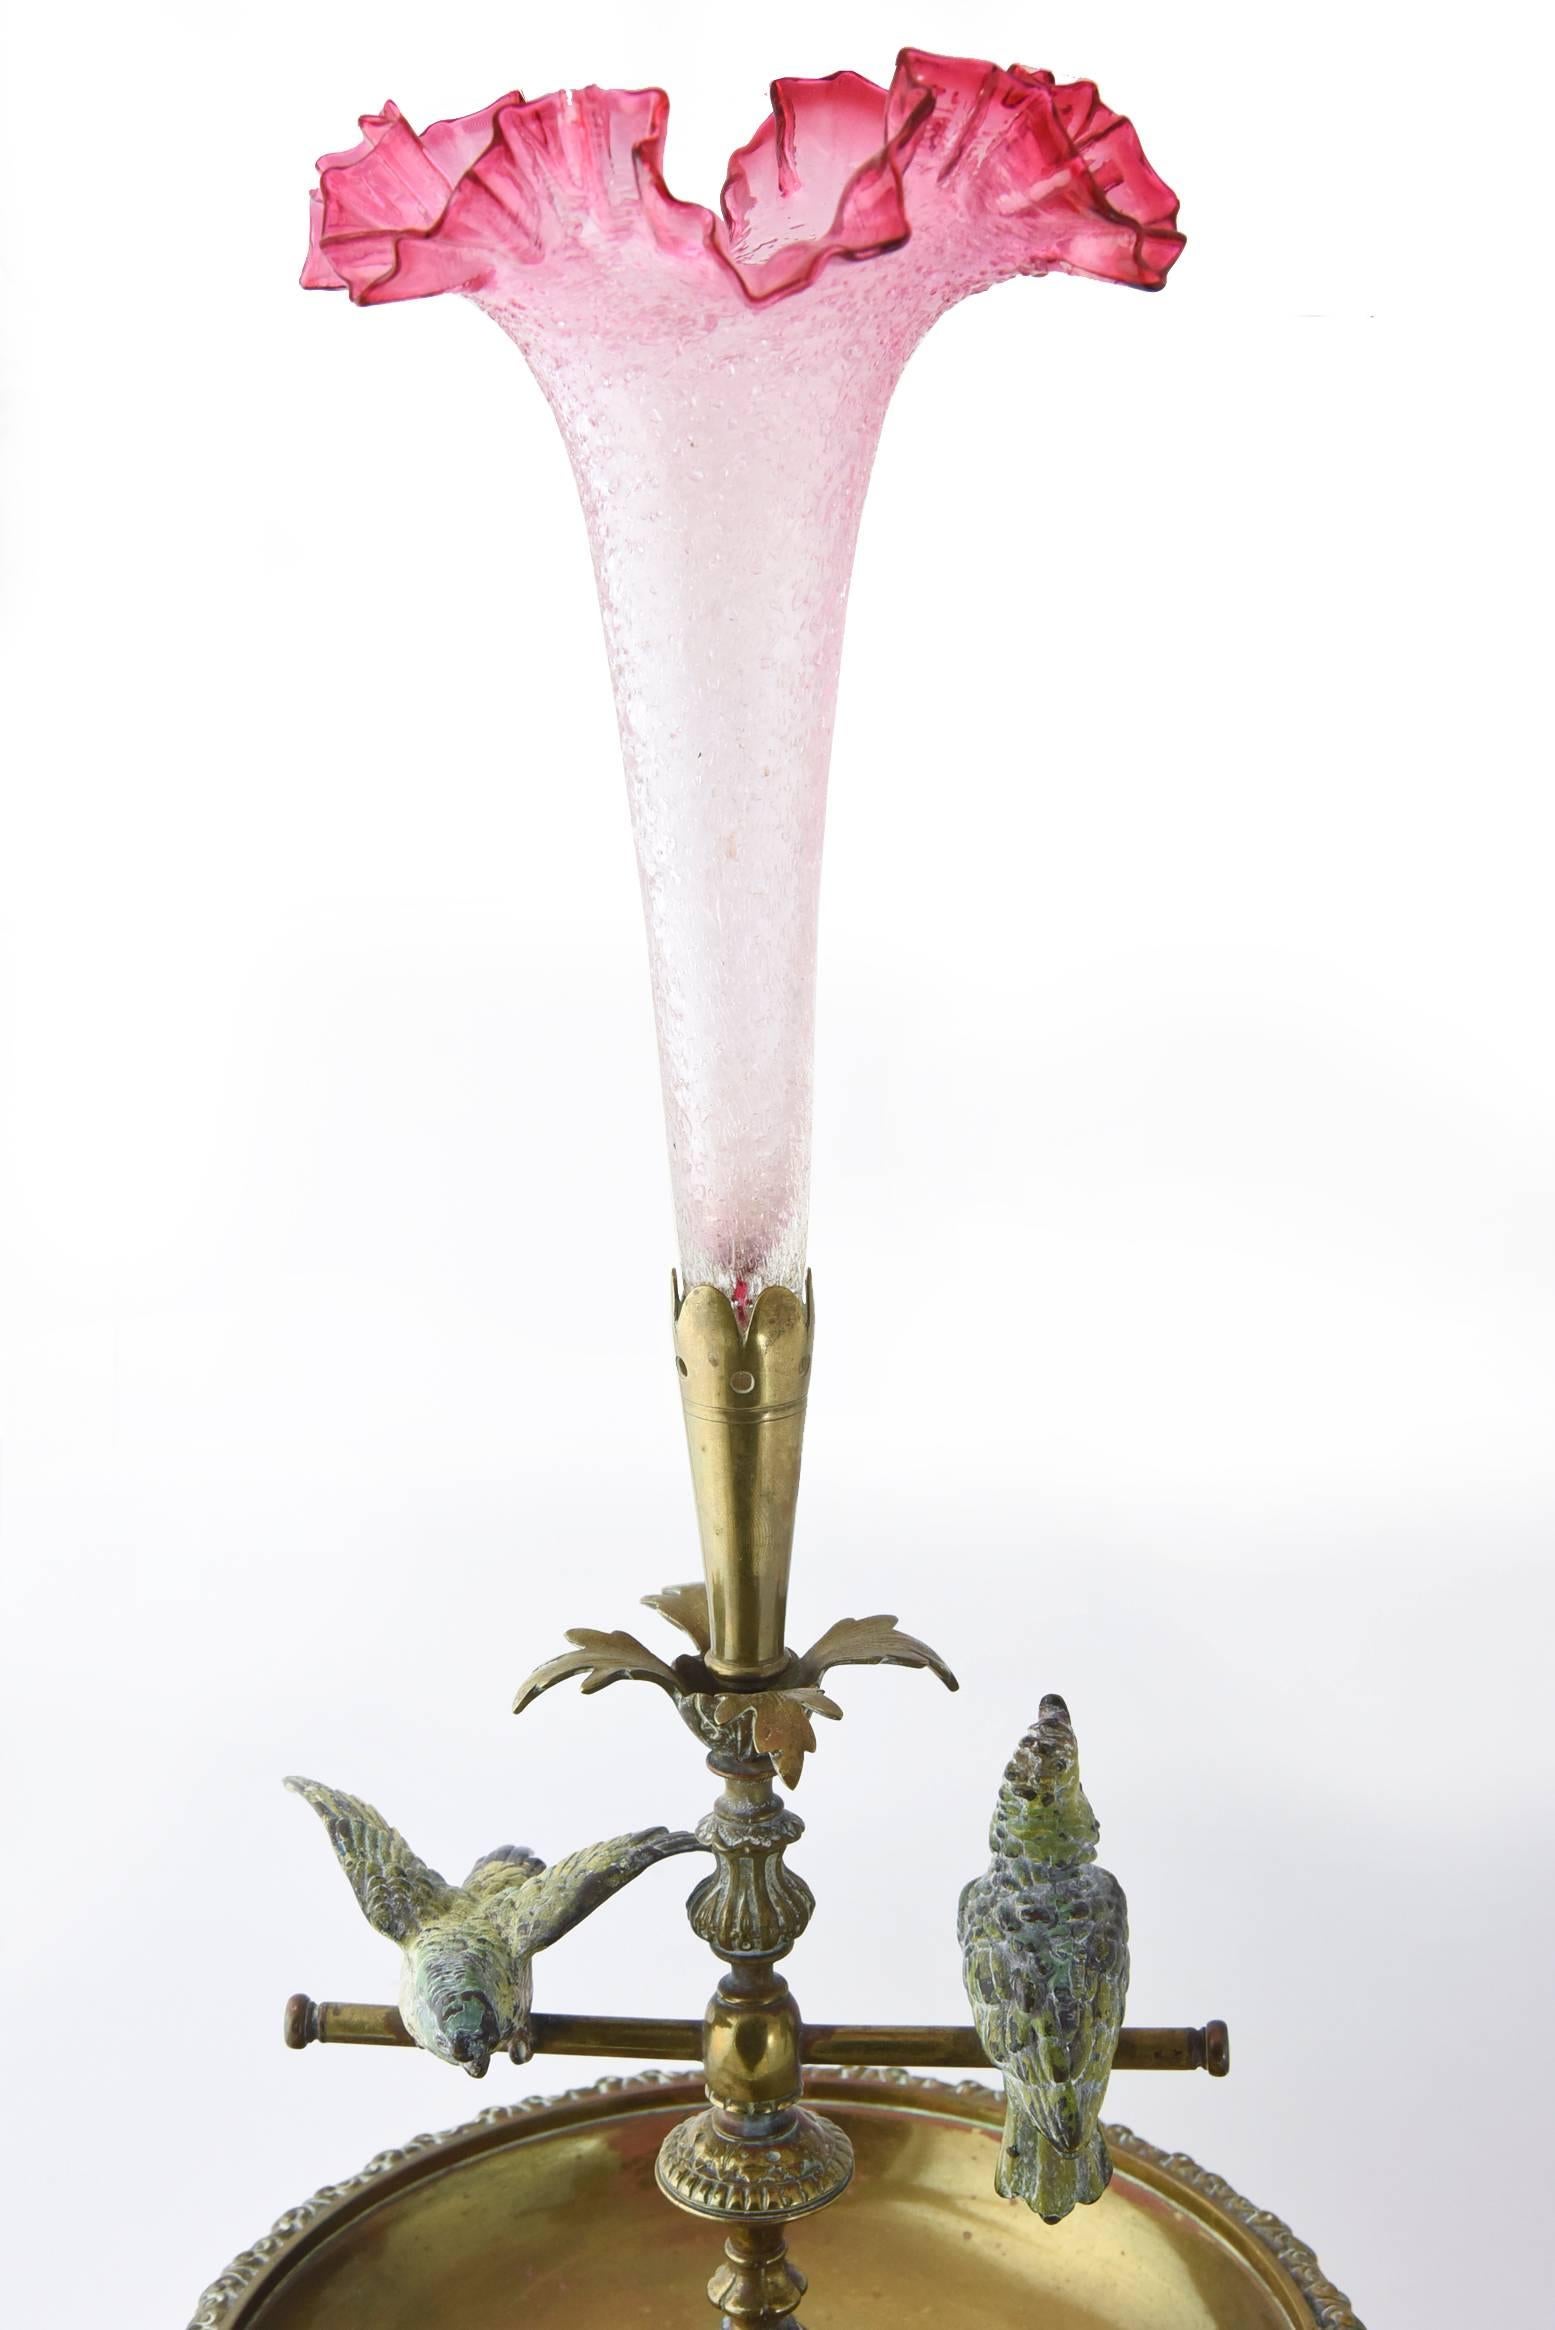 Early 20th century Epergne centerpiece with two Vienna bronze cold painted cockatiels on teeter totter swings with a beautiful crackled pink ruffled art glass tulip vase. The piece is unsigned.